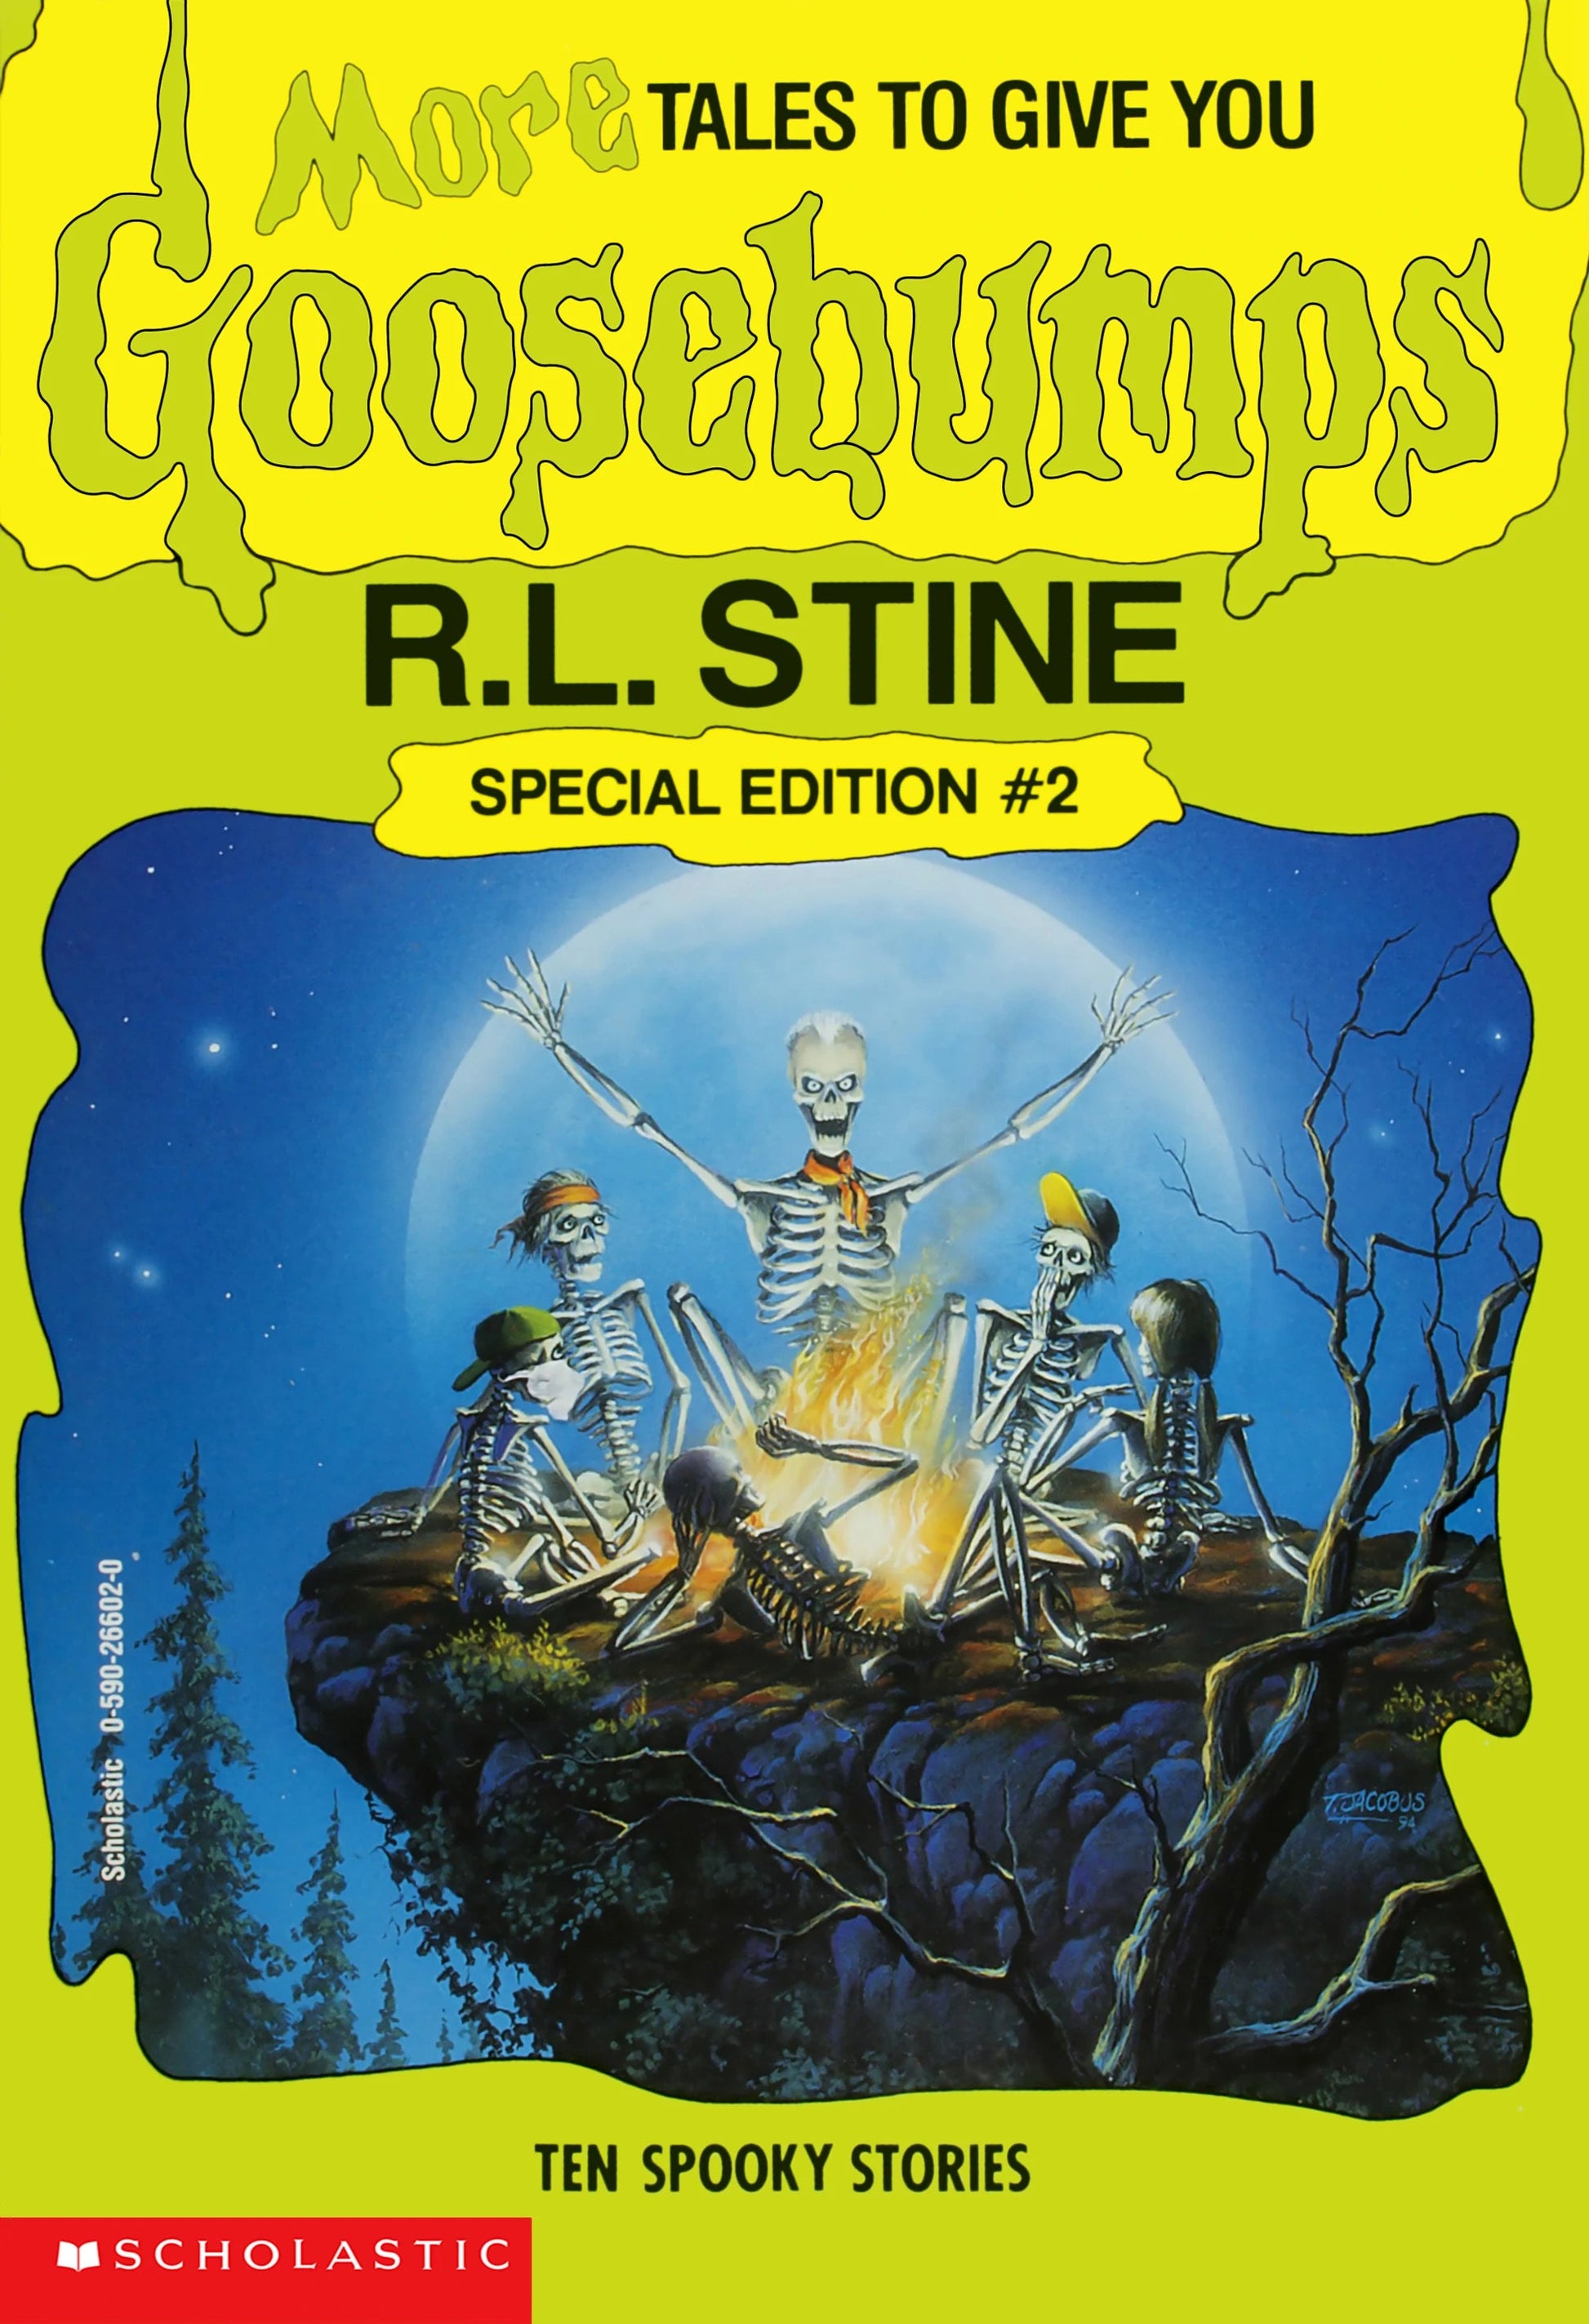 More Tales to Give You Goosebumps (Anthology #2) by R.L. Stine - Asylum Books